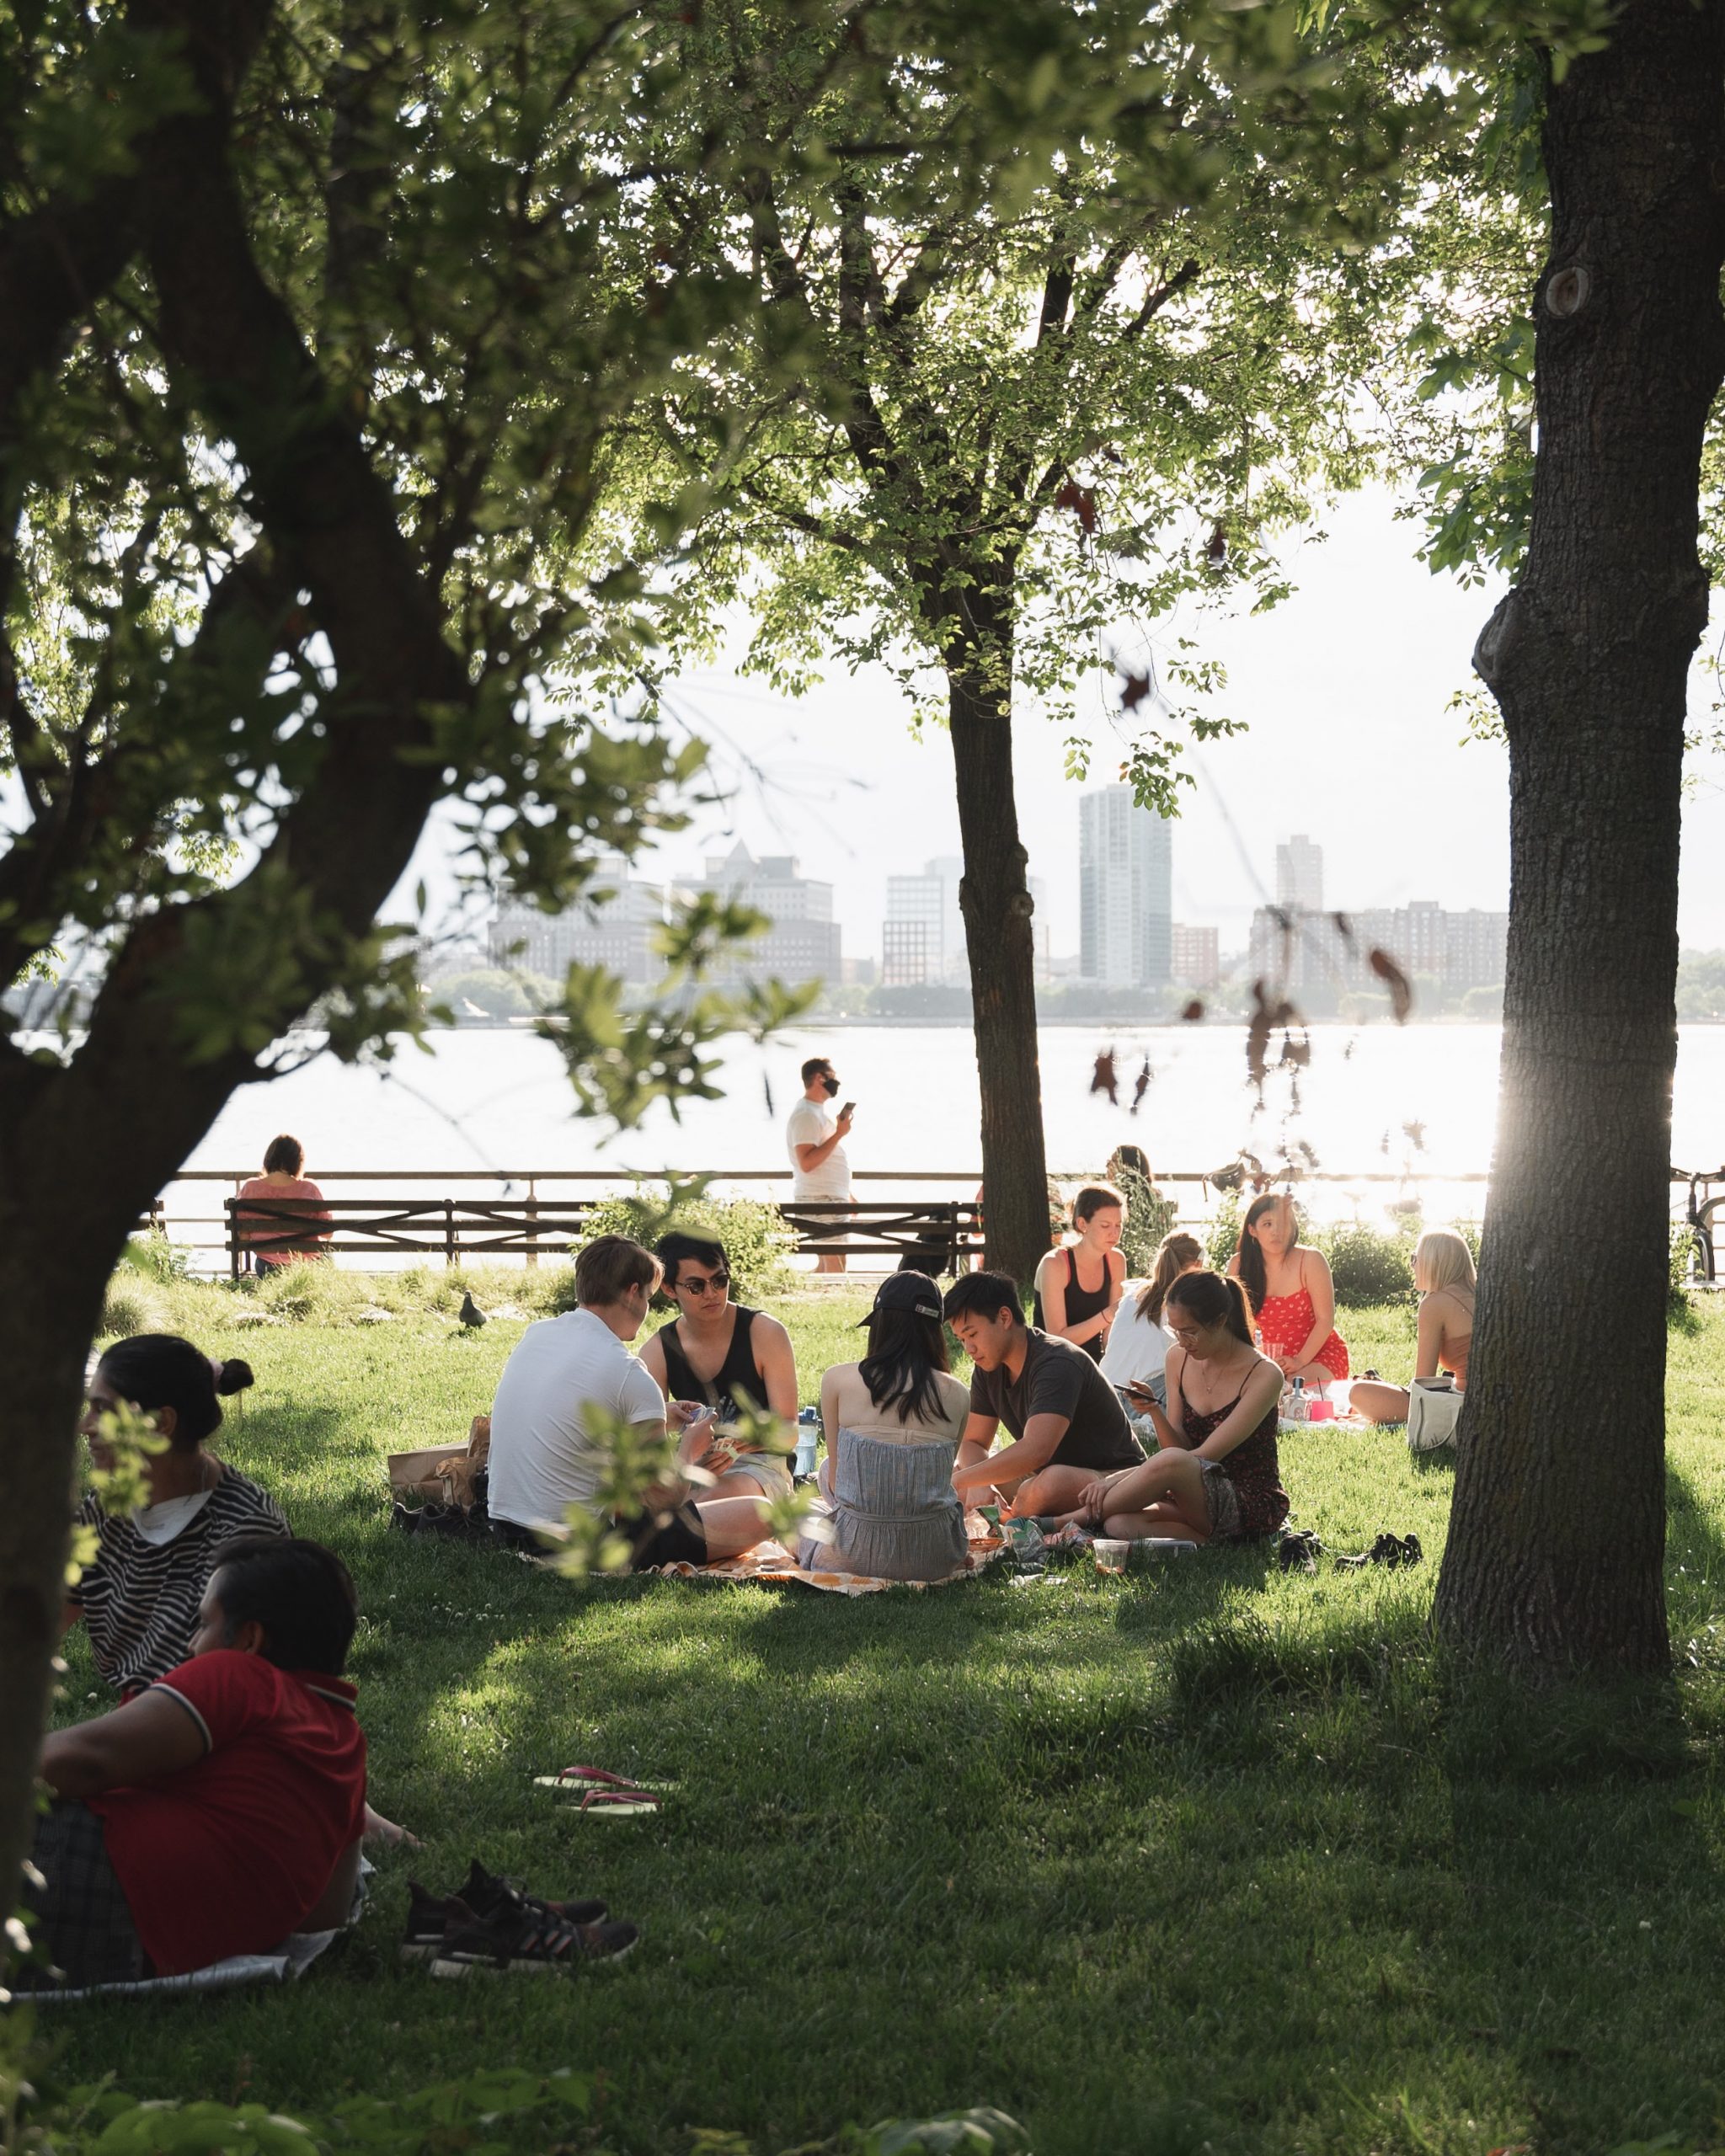 Picnicking In The Park: Where to Picnic at Central Park, Near The Sagamore